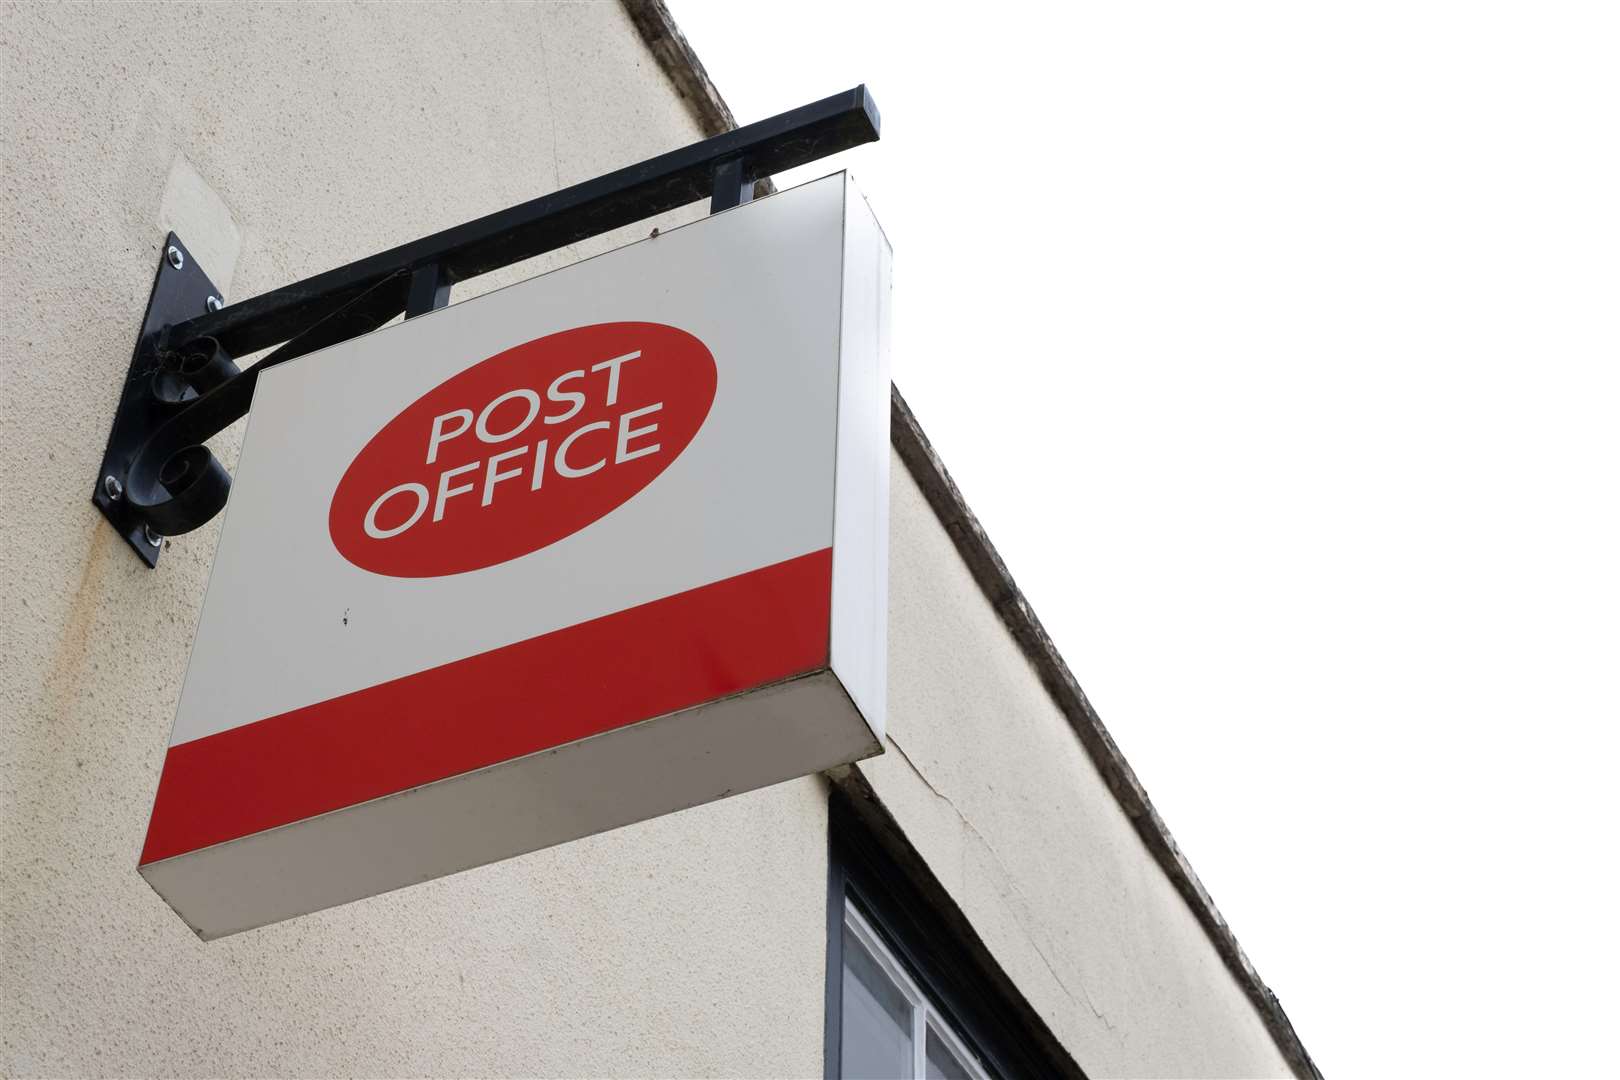 What kind of service does the community want in Badenoch, asks long-serving postmaster